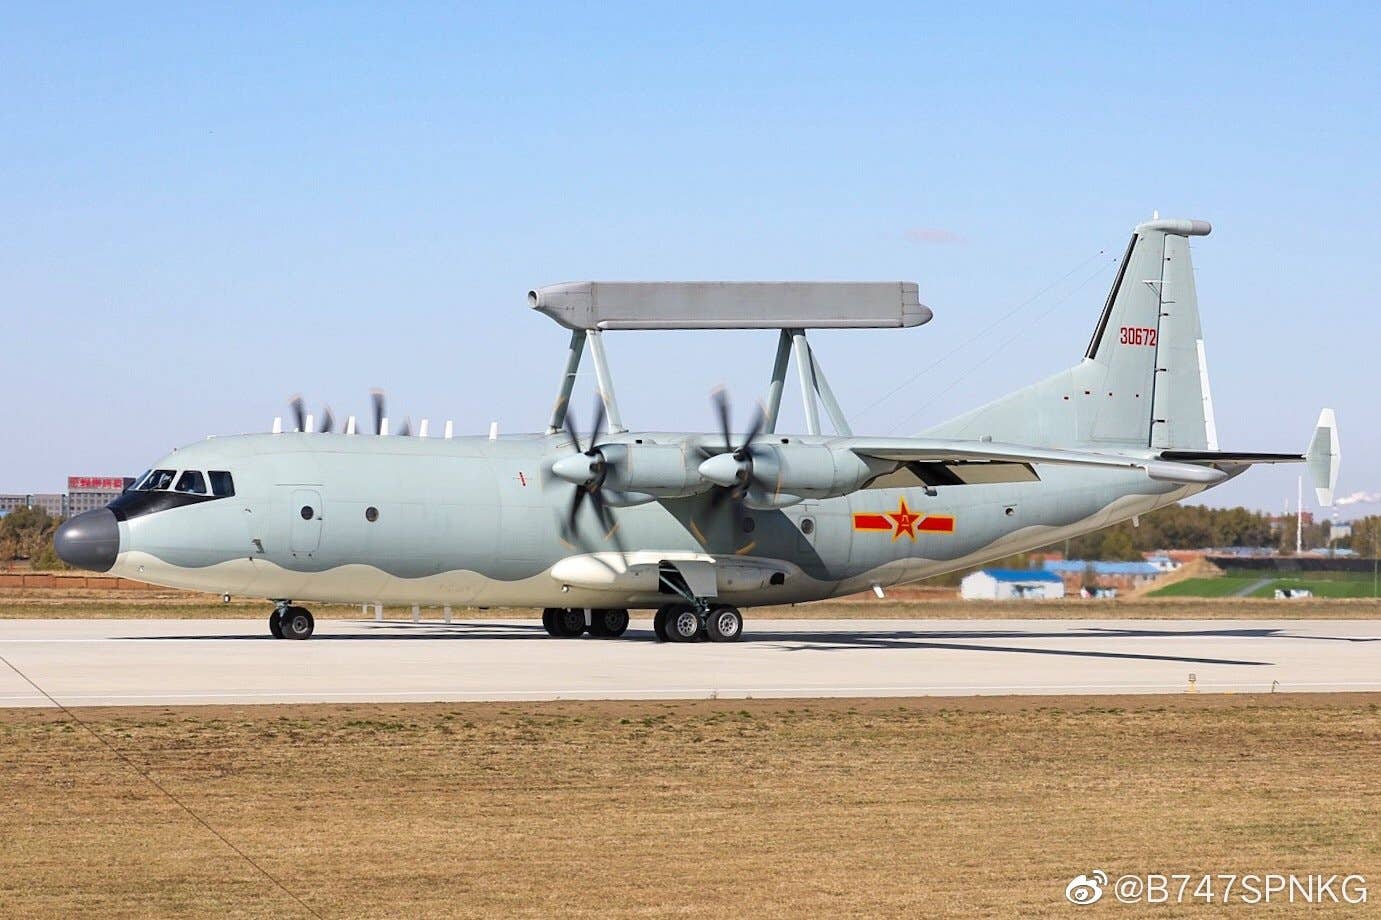 A KJ-200A operated by the 26th Division, PLAAF. <em>B747SPNKG/via Chinese internet</em>